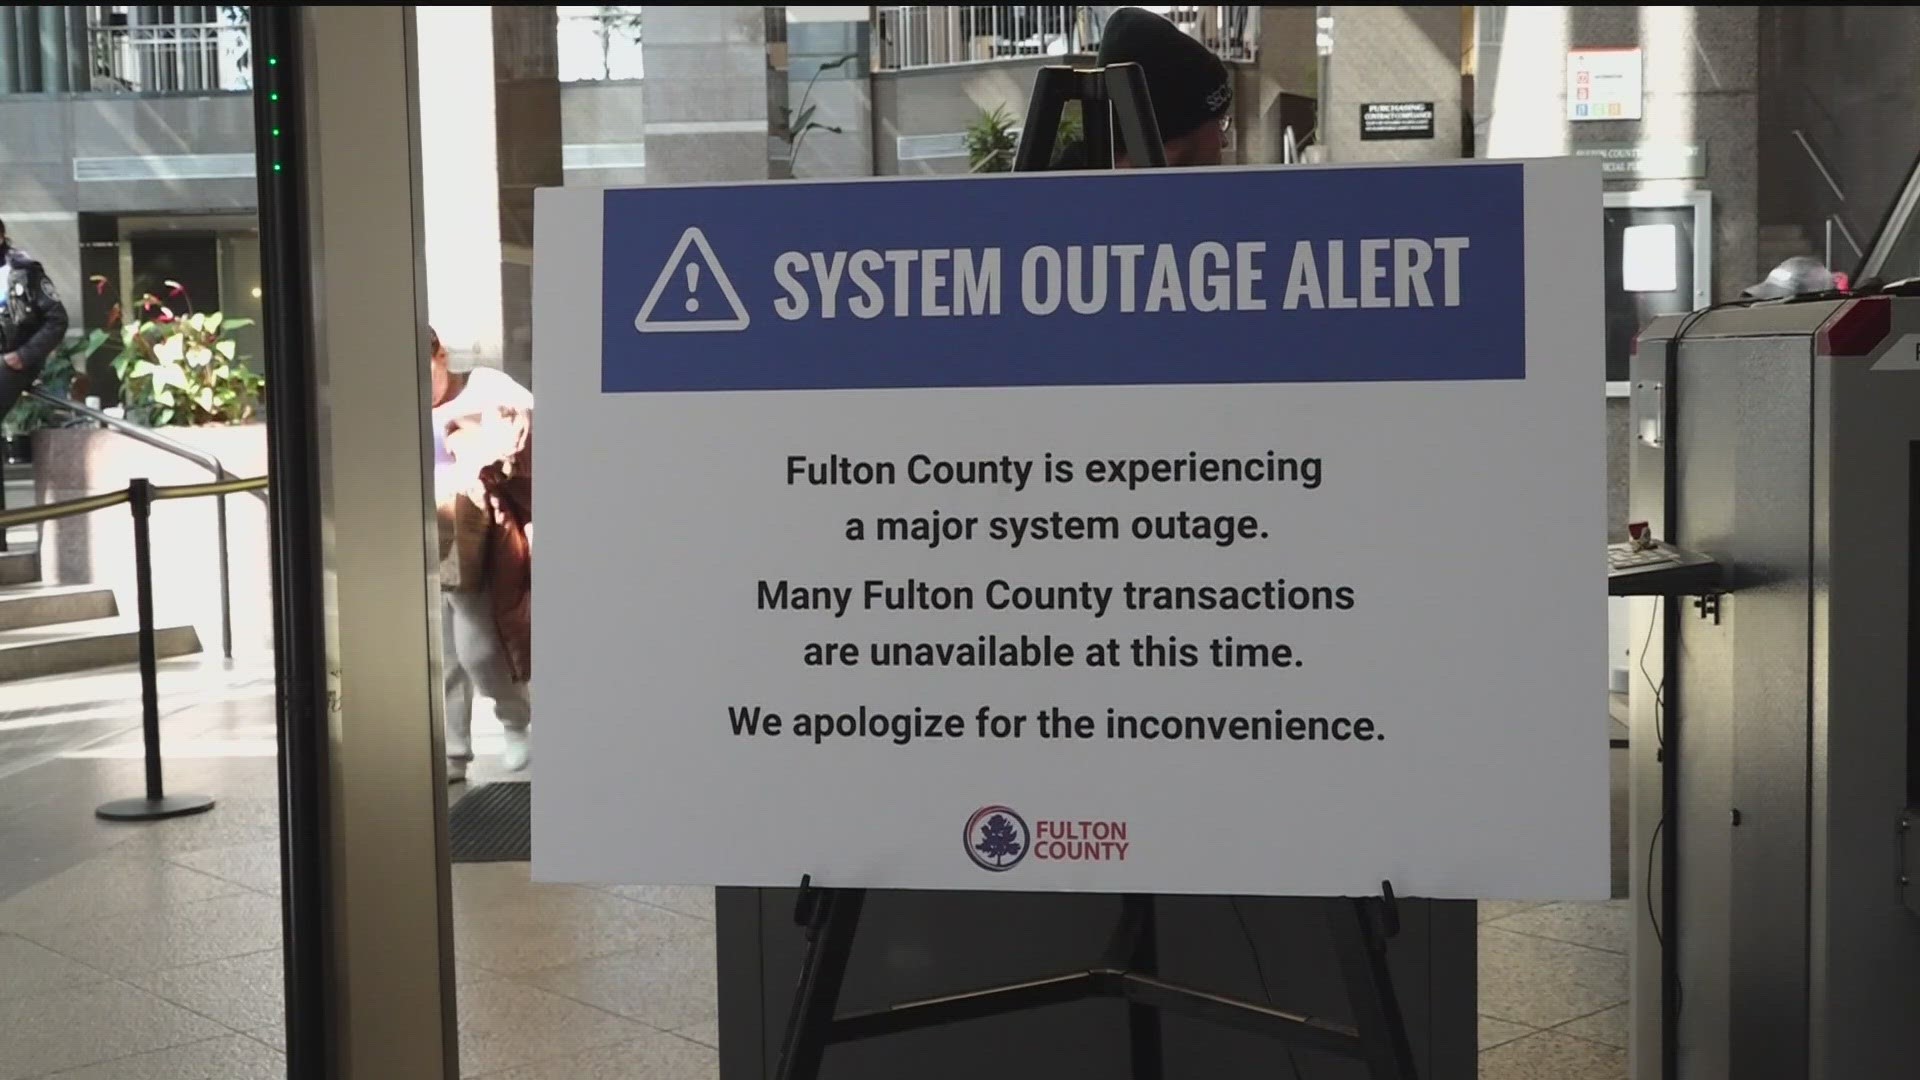 The latest update comes amid growing concerns from attorneys and residents that the incident caused a number of services to be knocked offline.